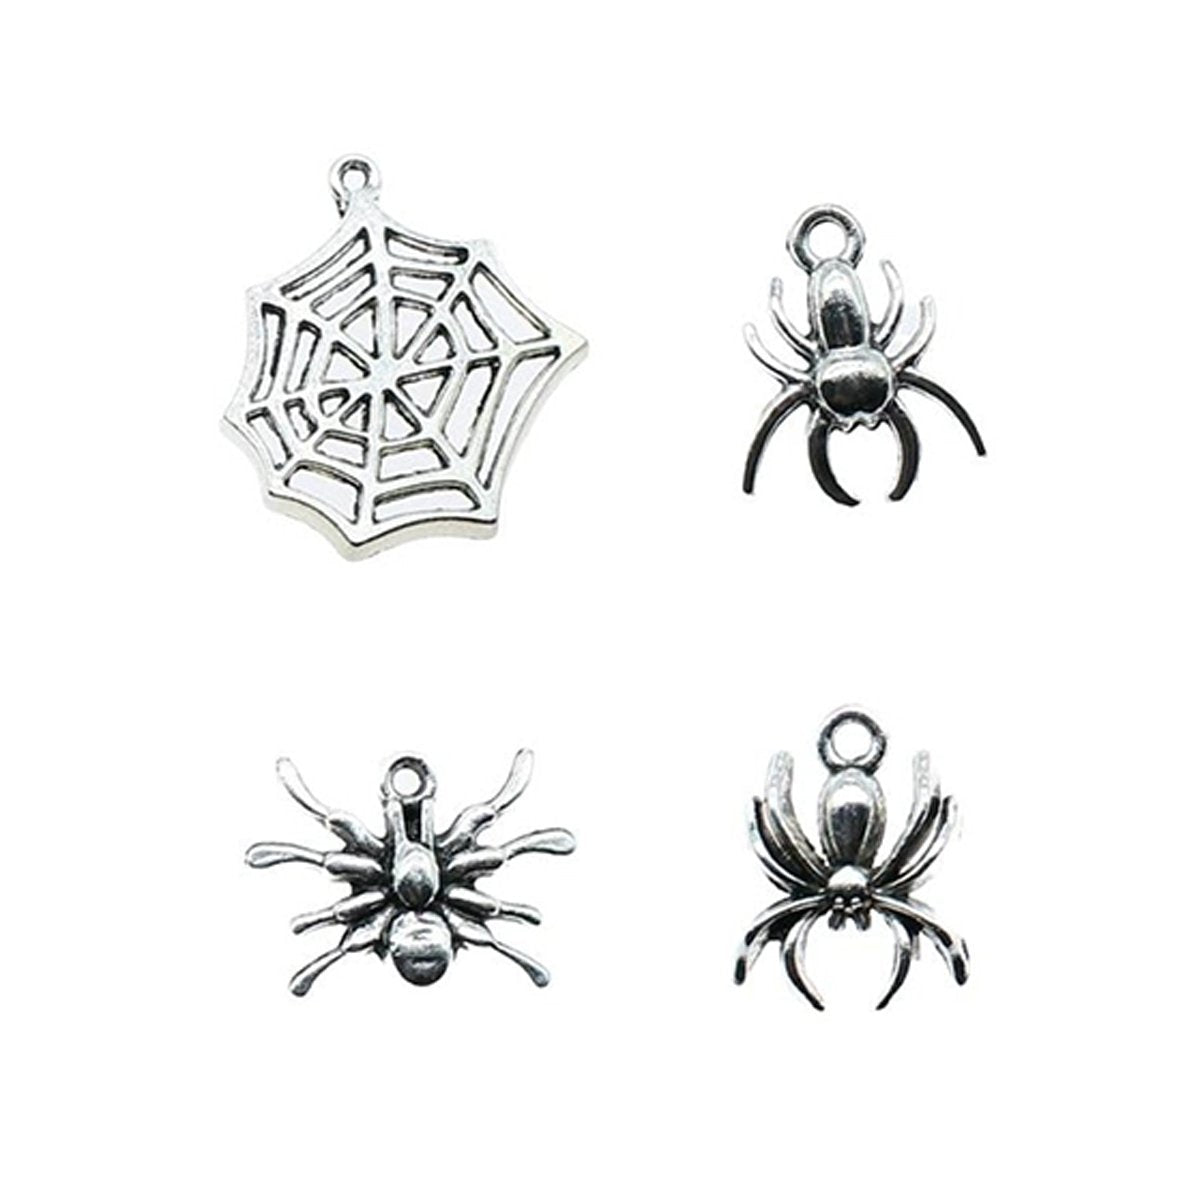 4pcs Spider Charms Antique Silver Colour Spider Charms Pendants For Bracelets Spider Cobweb Charms Making Jewellery - Mixed - - Asia Sell